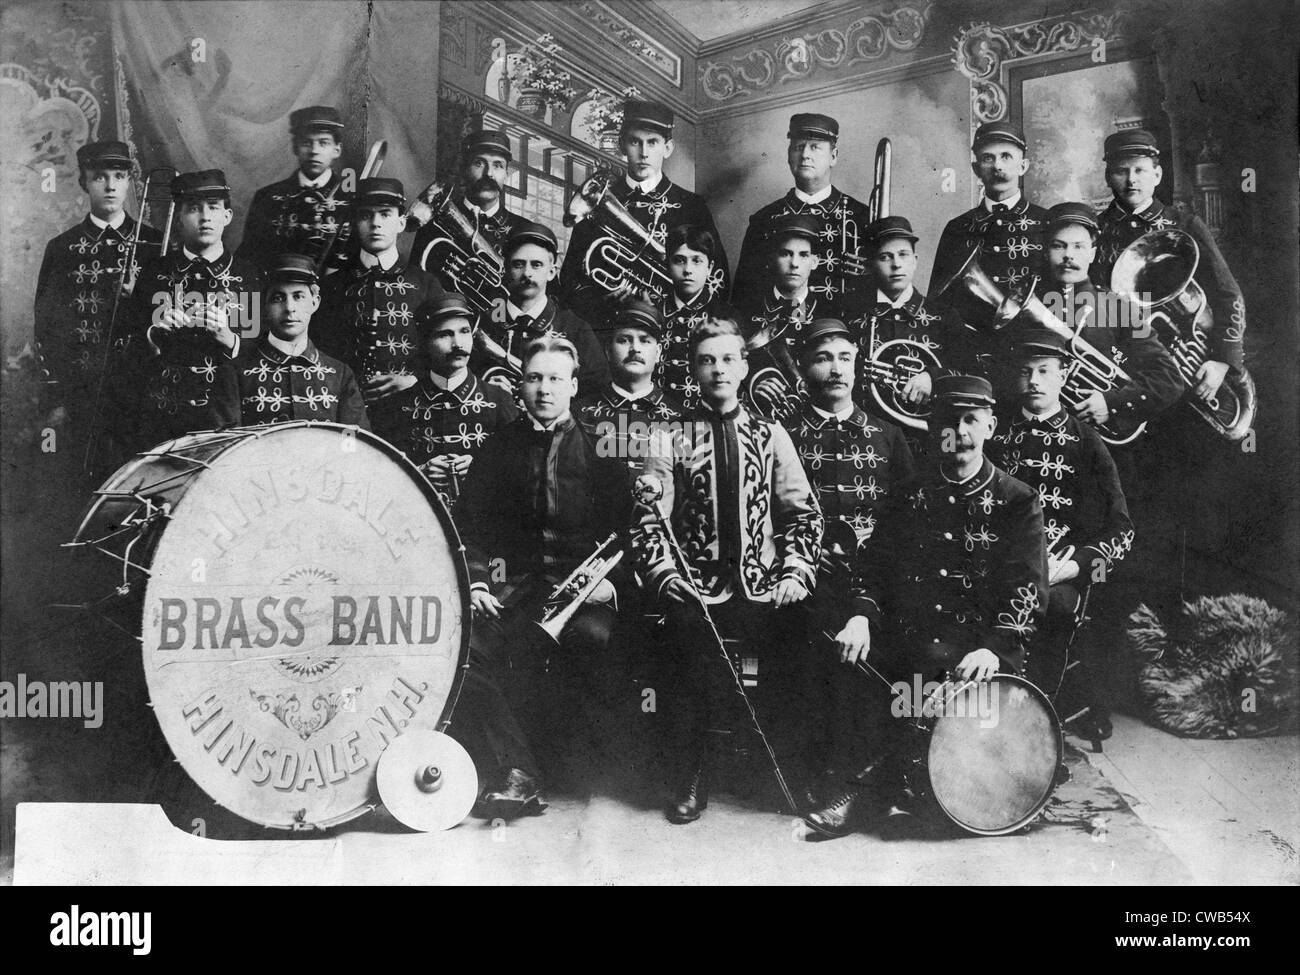 Hinsdale Brass Band, Hinsdale, New Hampshire, Fotografie, 1906. Stockfoto